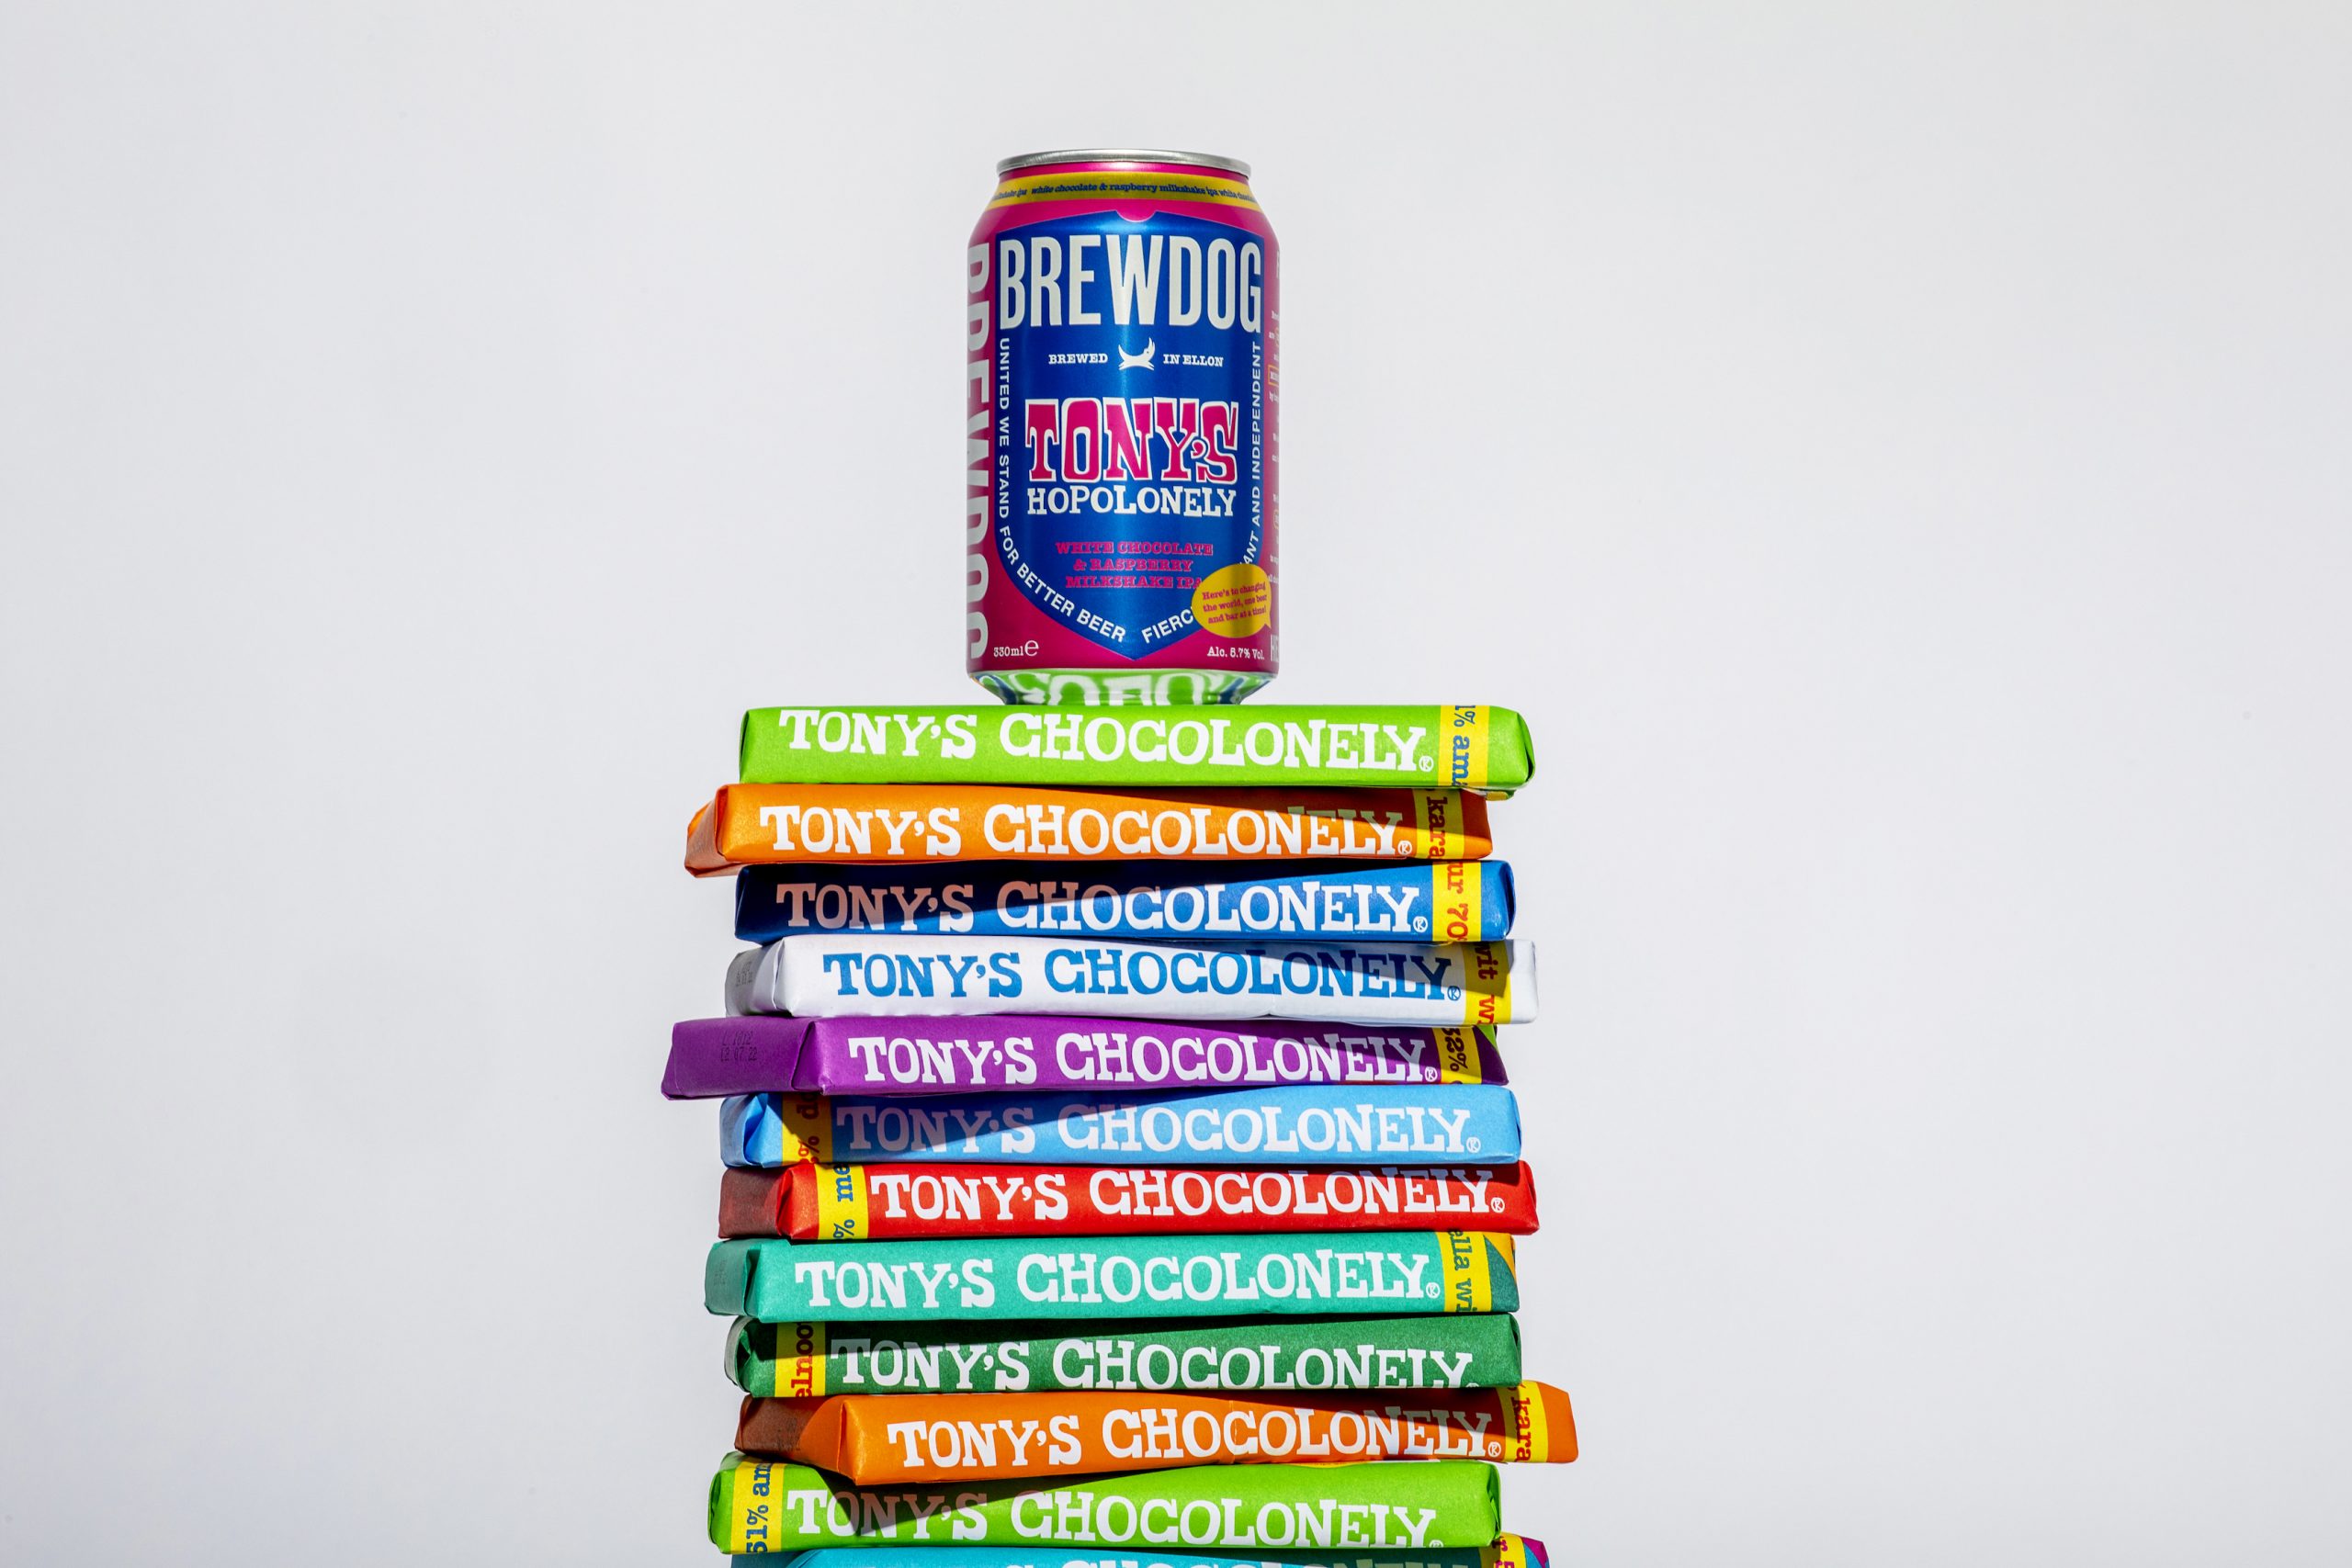 Tony’s Chocolonely teams up with beer brand